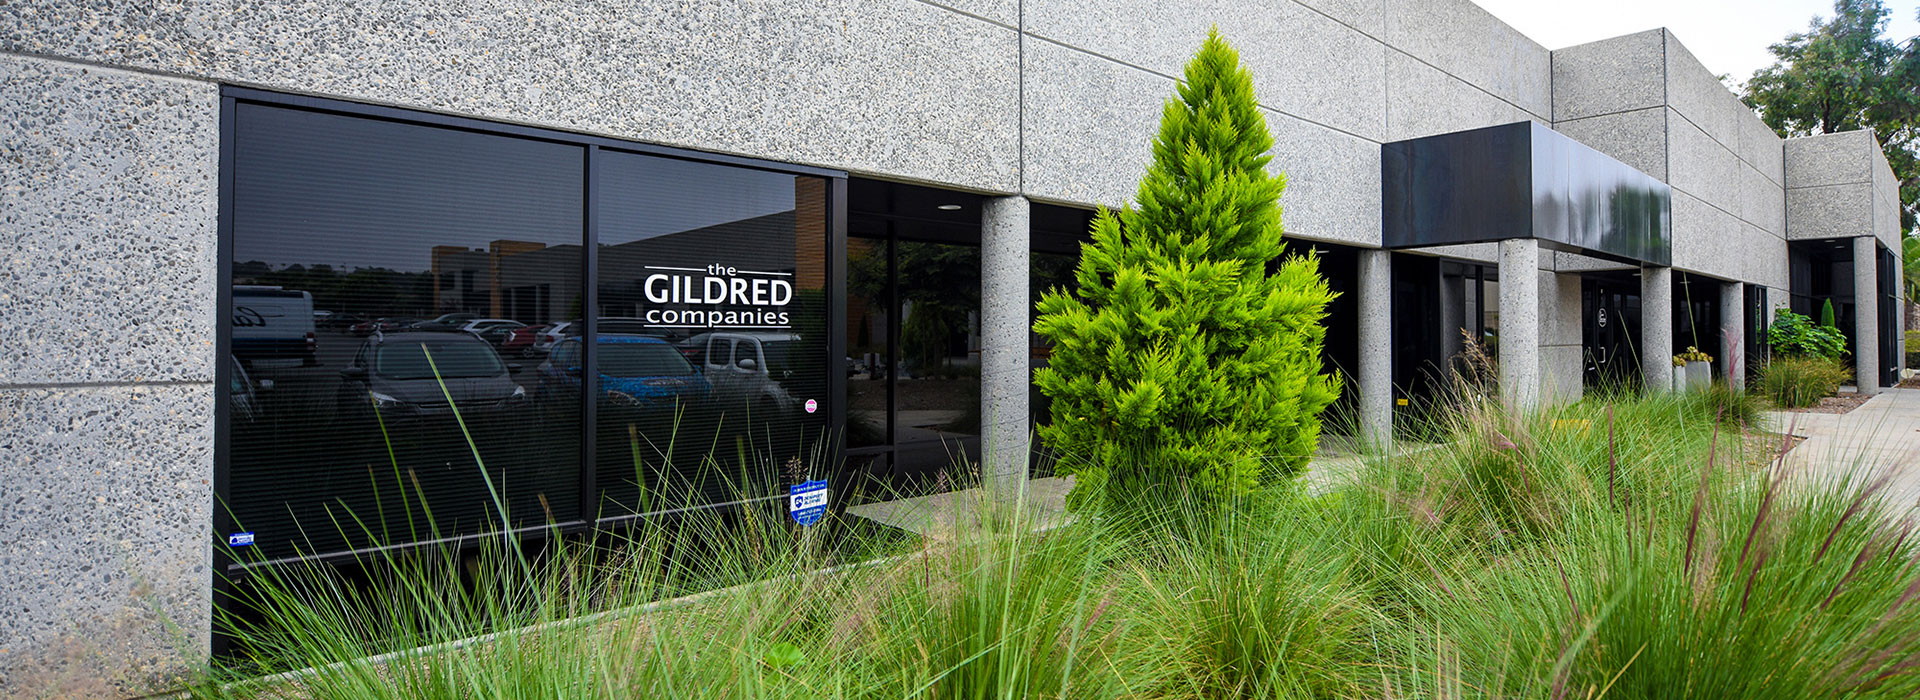 NEWS ABOUT THE GILDRED COMPANIES